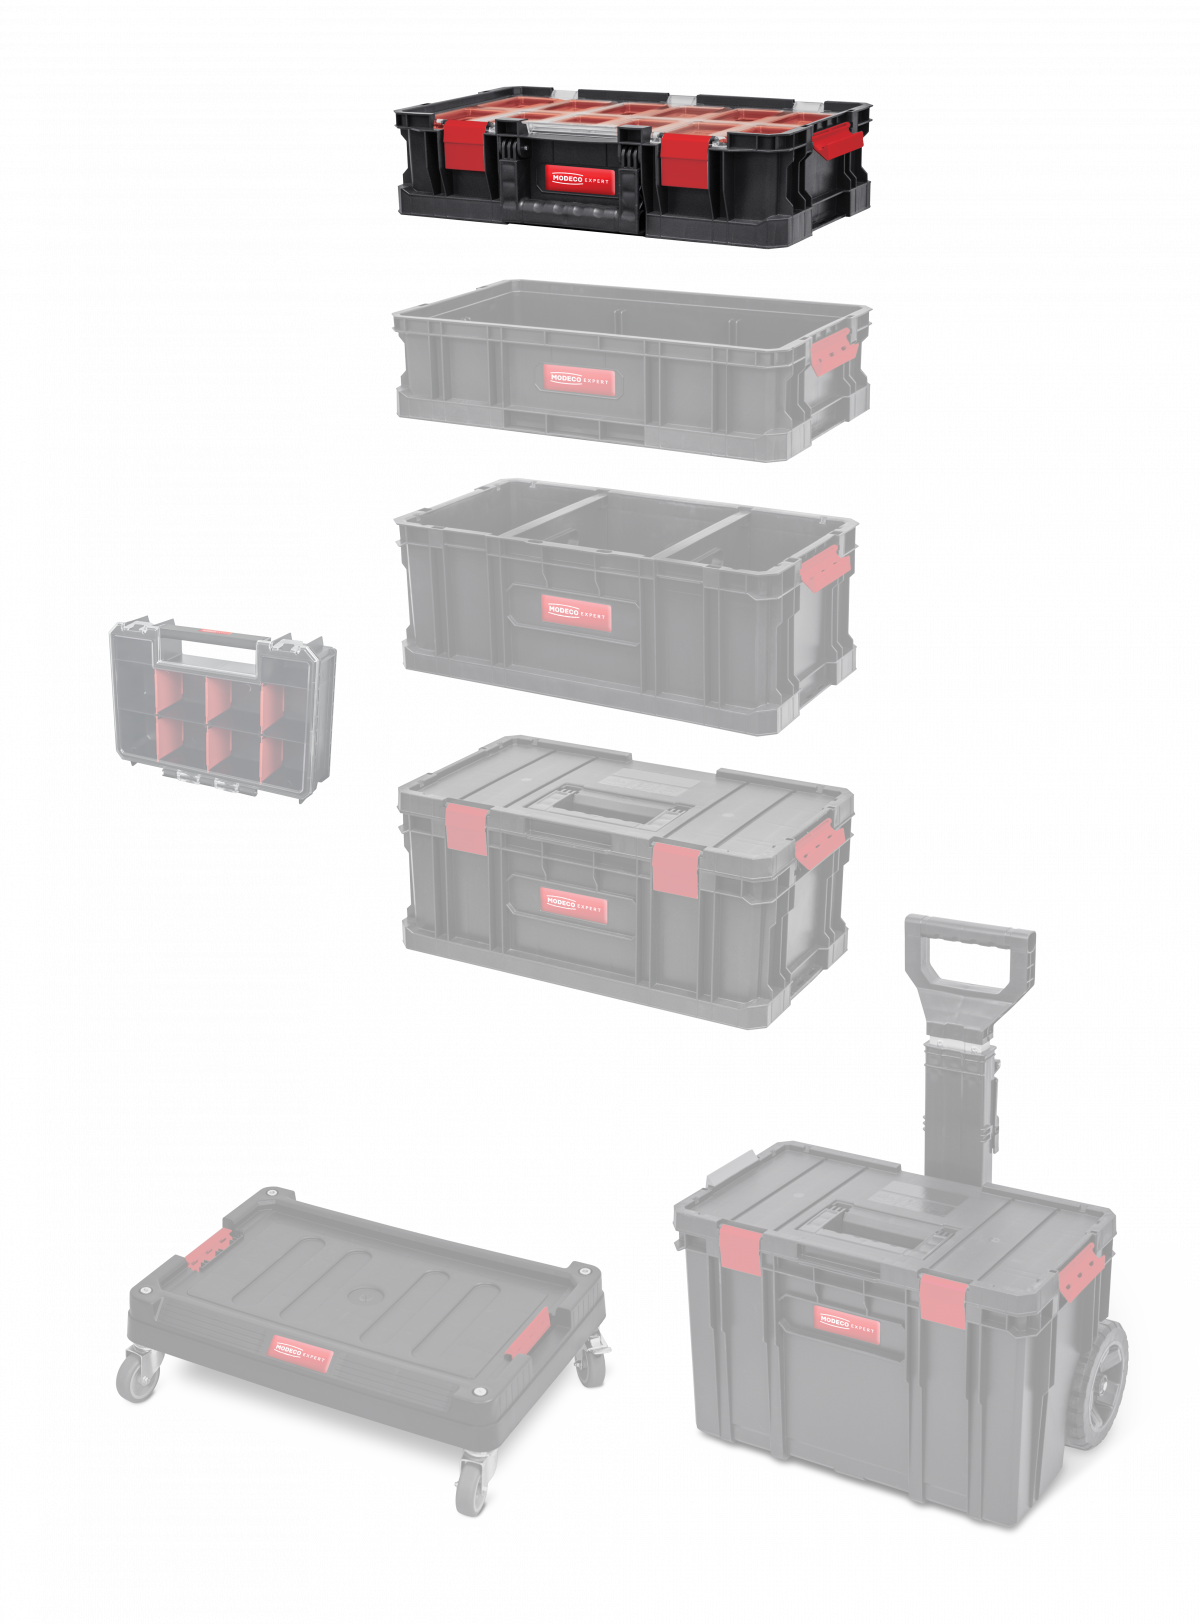 MN-03-170 Multi Storage System, organizer, 9 containers